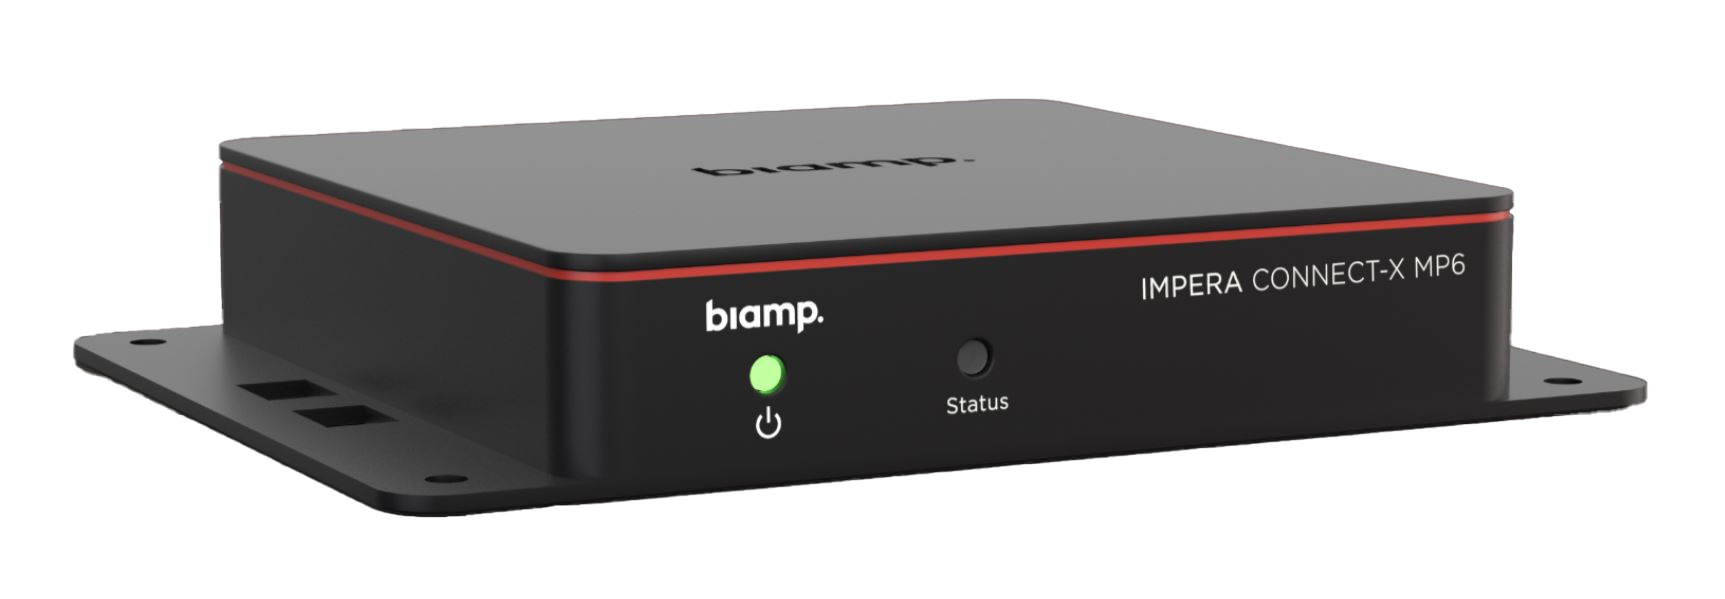 Biamp Impera Connect-X MP6 - MULTIPORT EXTENDER